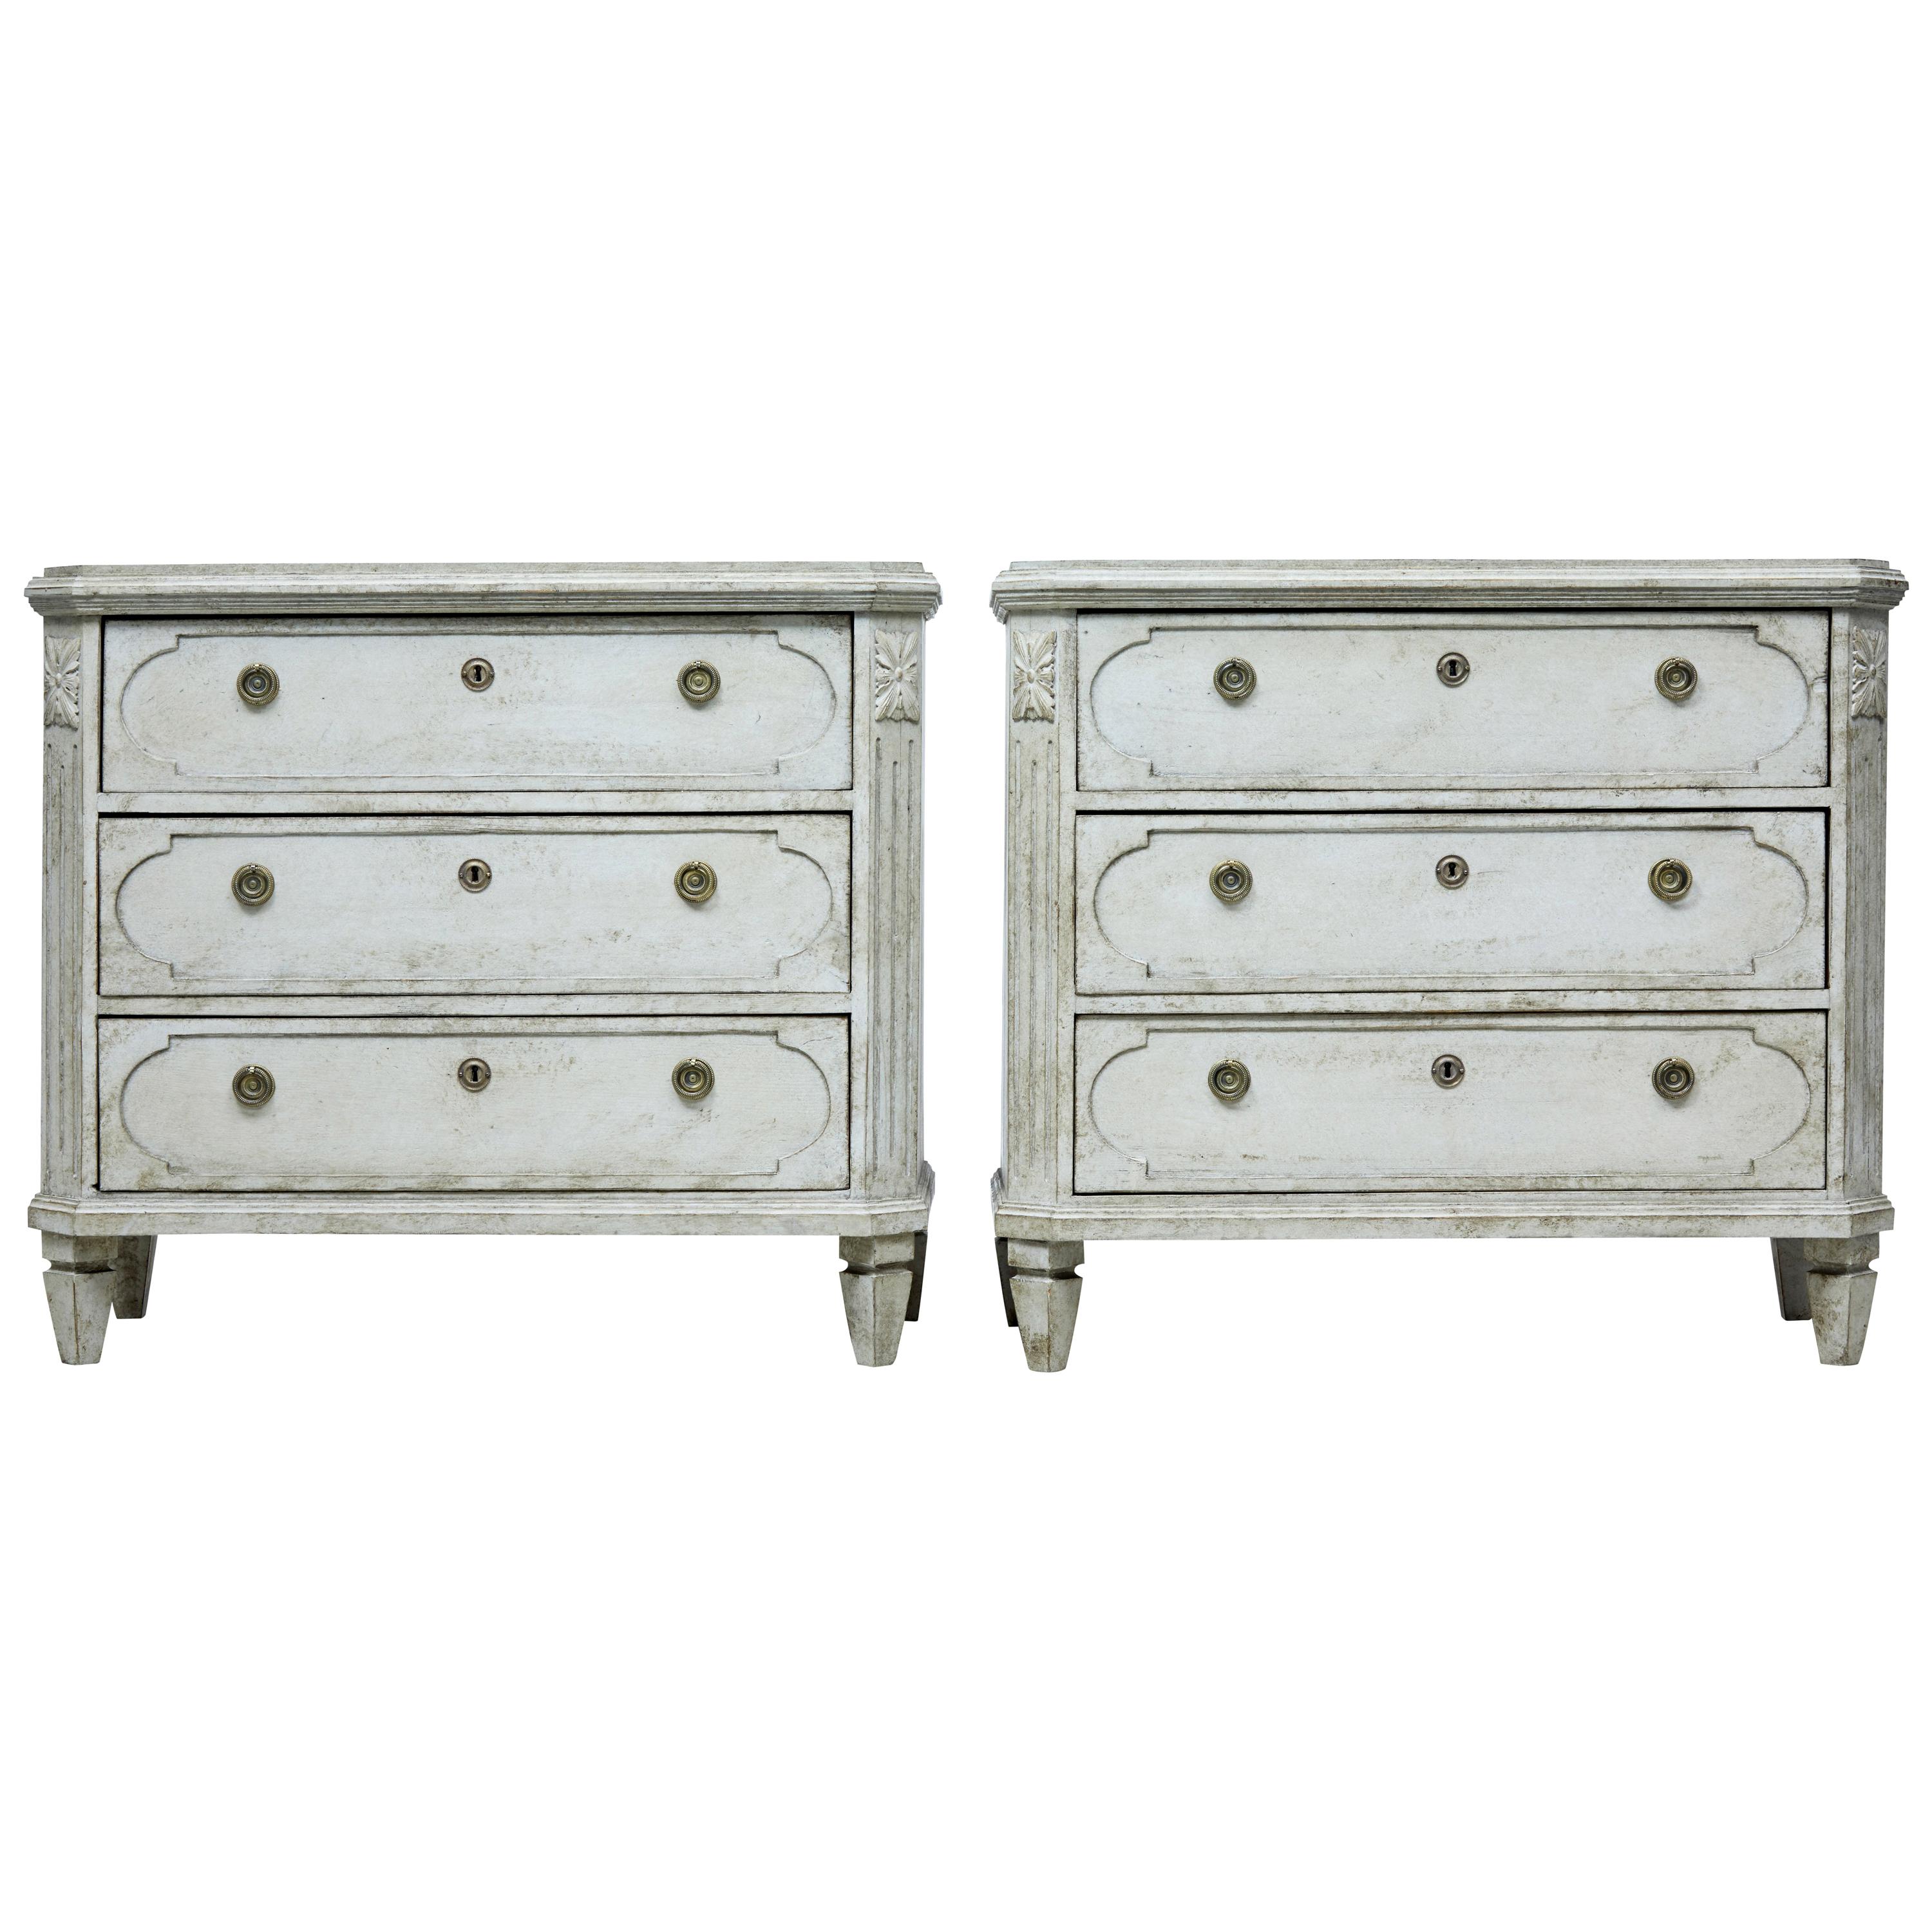 Fine Pair of 19th Century Swedish Painted Commodes